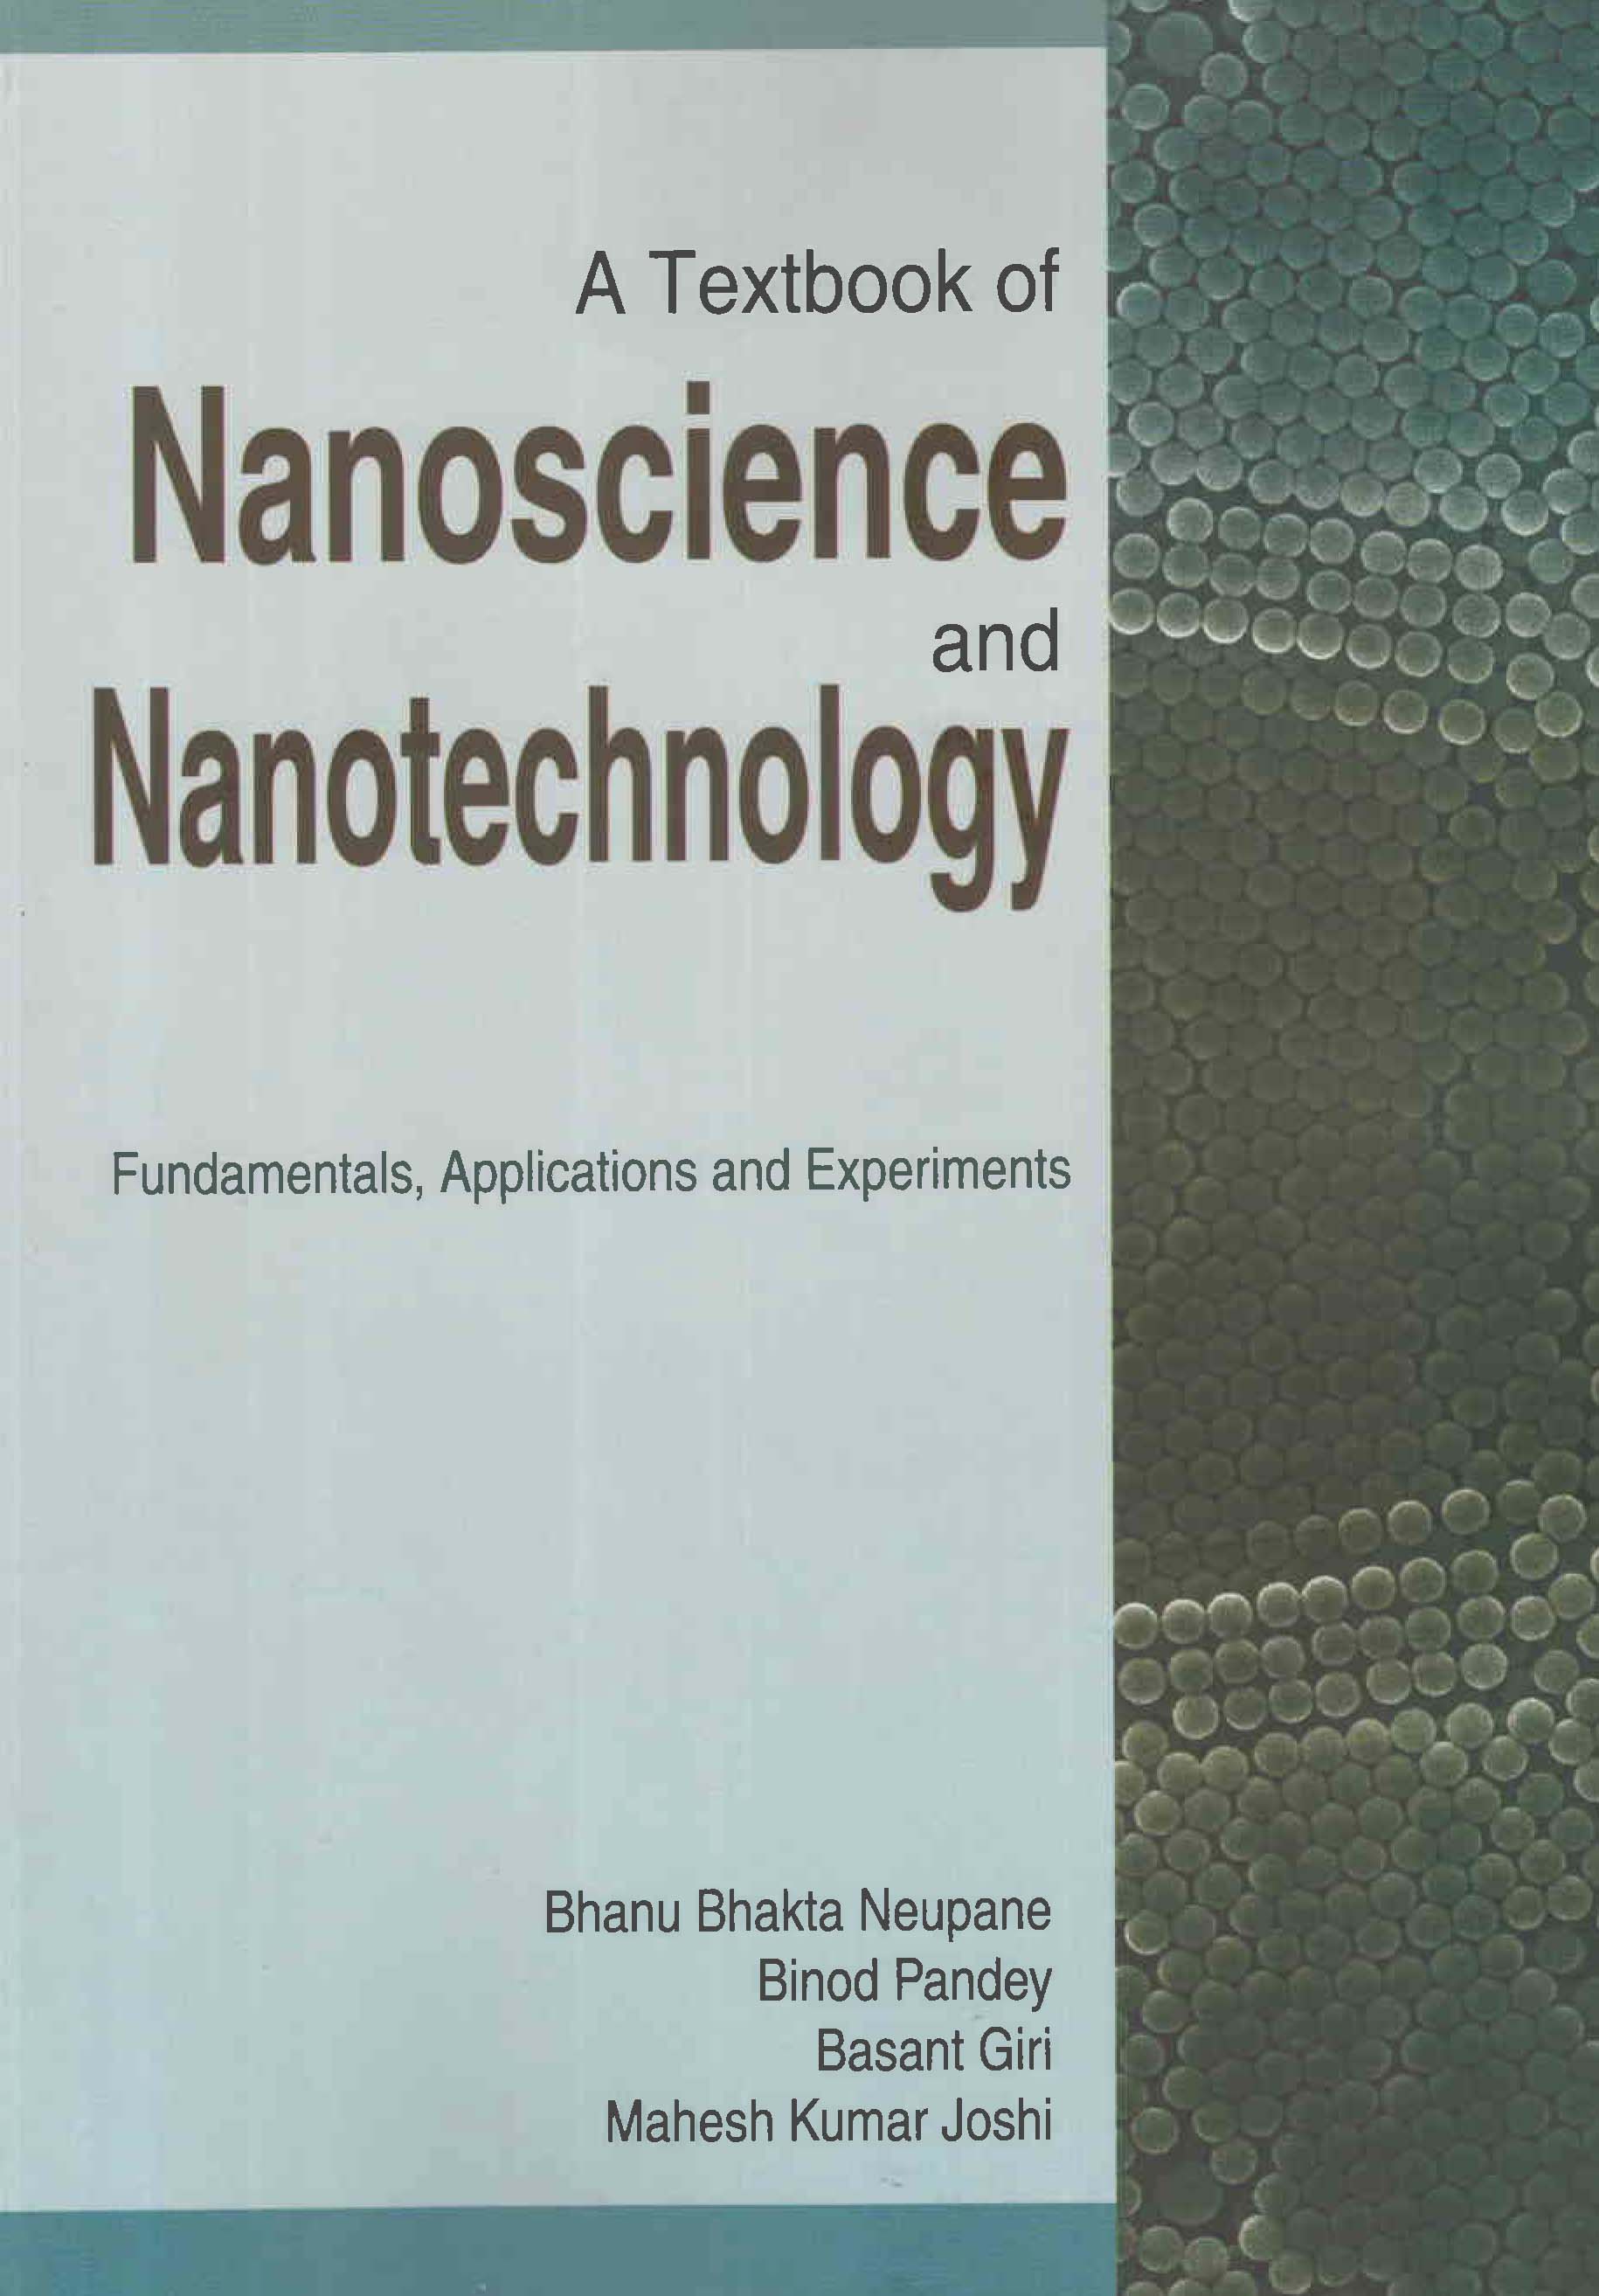 research papers on nanoscience and nanotechnology